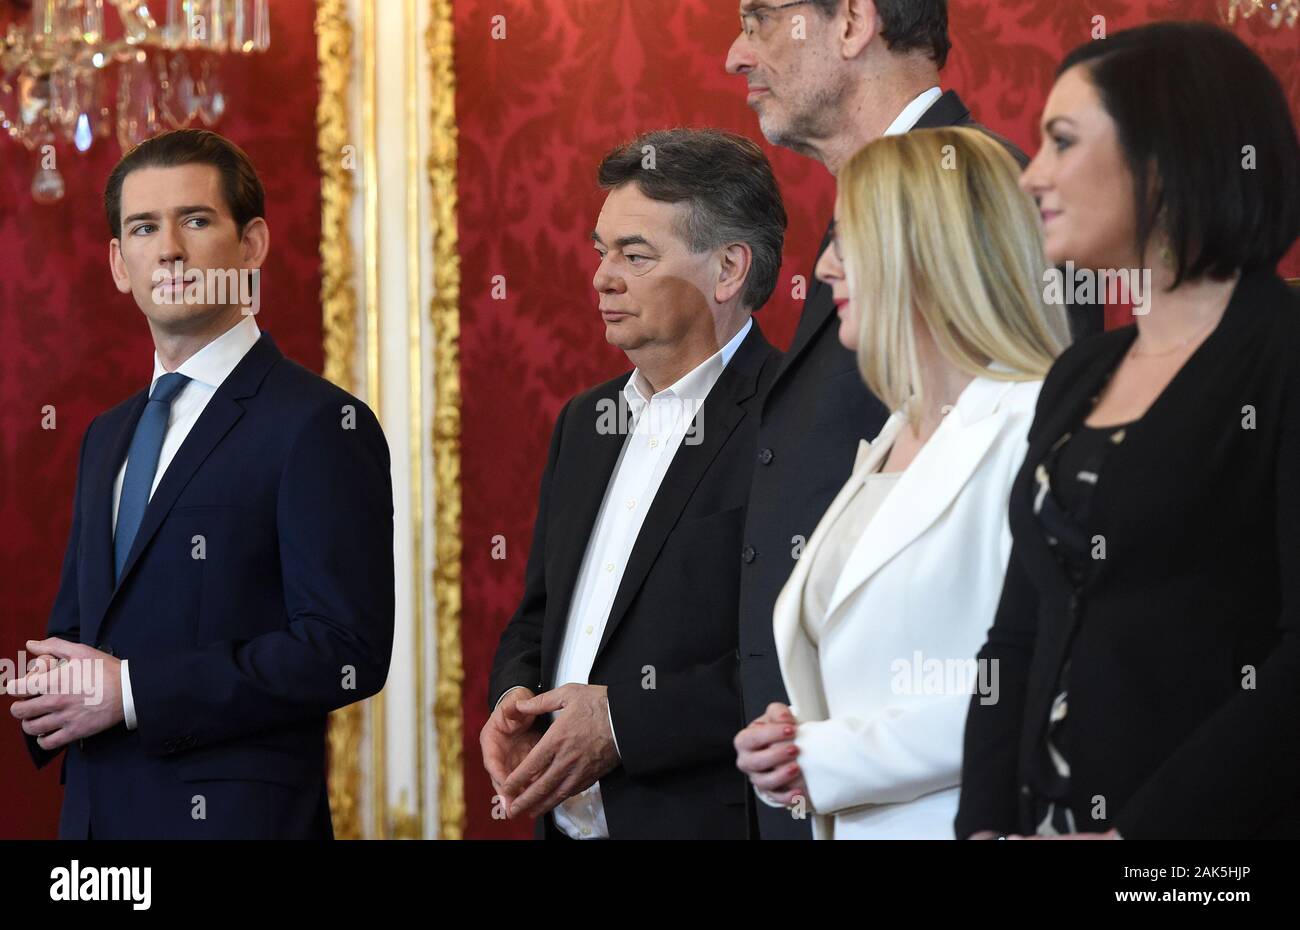 Vienna, Autstria. 7th Jan, 2020. Austria's new Chancellor Sebastian Kurz (1st, L) and new Vice Chancellor Werner Kogler (2nd, L) attend the swearing-in ceremony in Vienna, Autstria, Jan. 7, 2020. Austria's new coalition government was sworn in by President Alexander Van der Bellen at the presidential residence of Hofburg Palace on Tuesday. Credit: Guo Chen/Xinhua/Alamy Live News Stock Photo